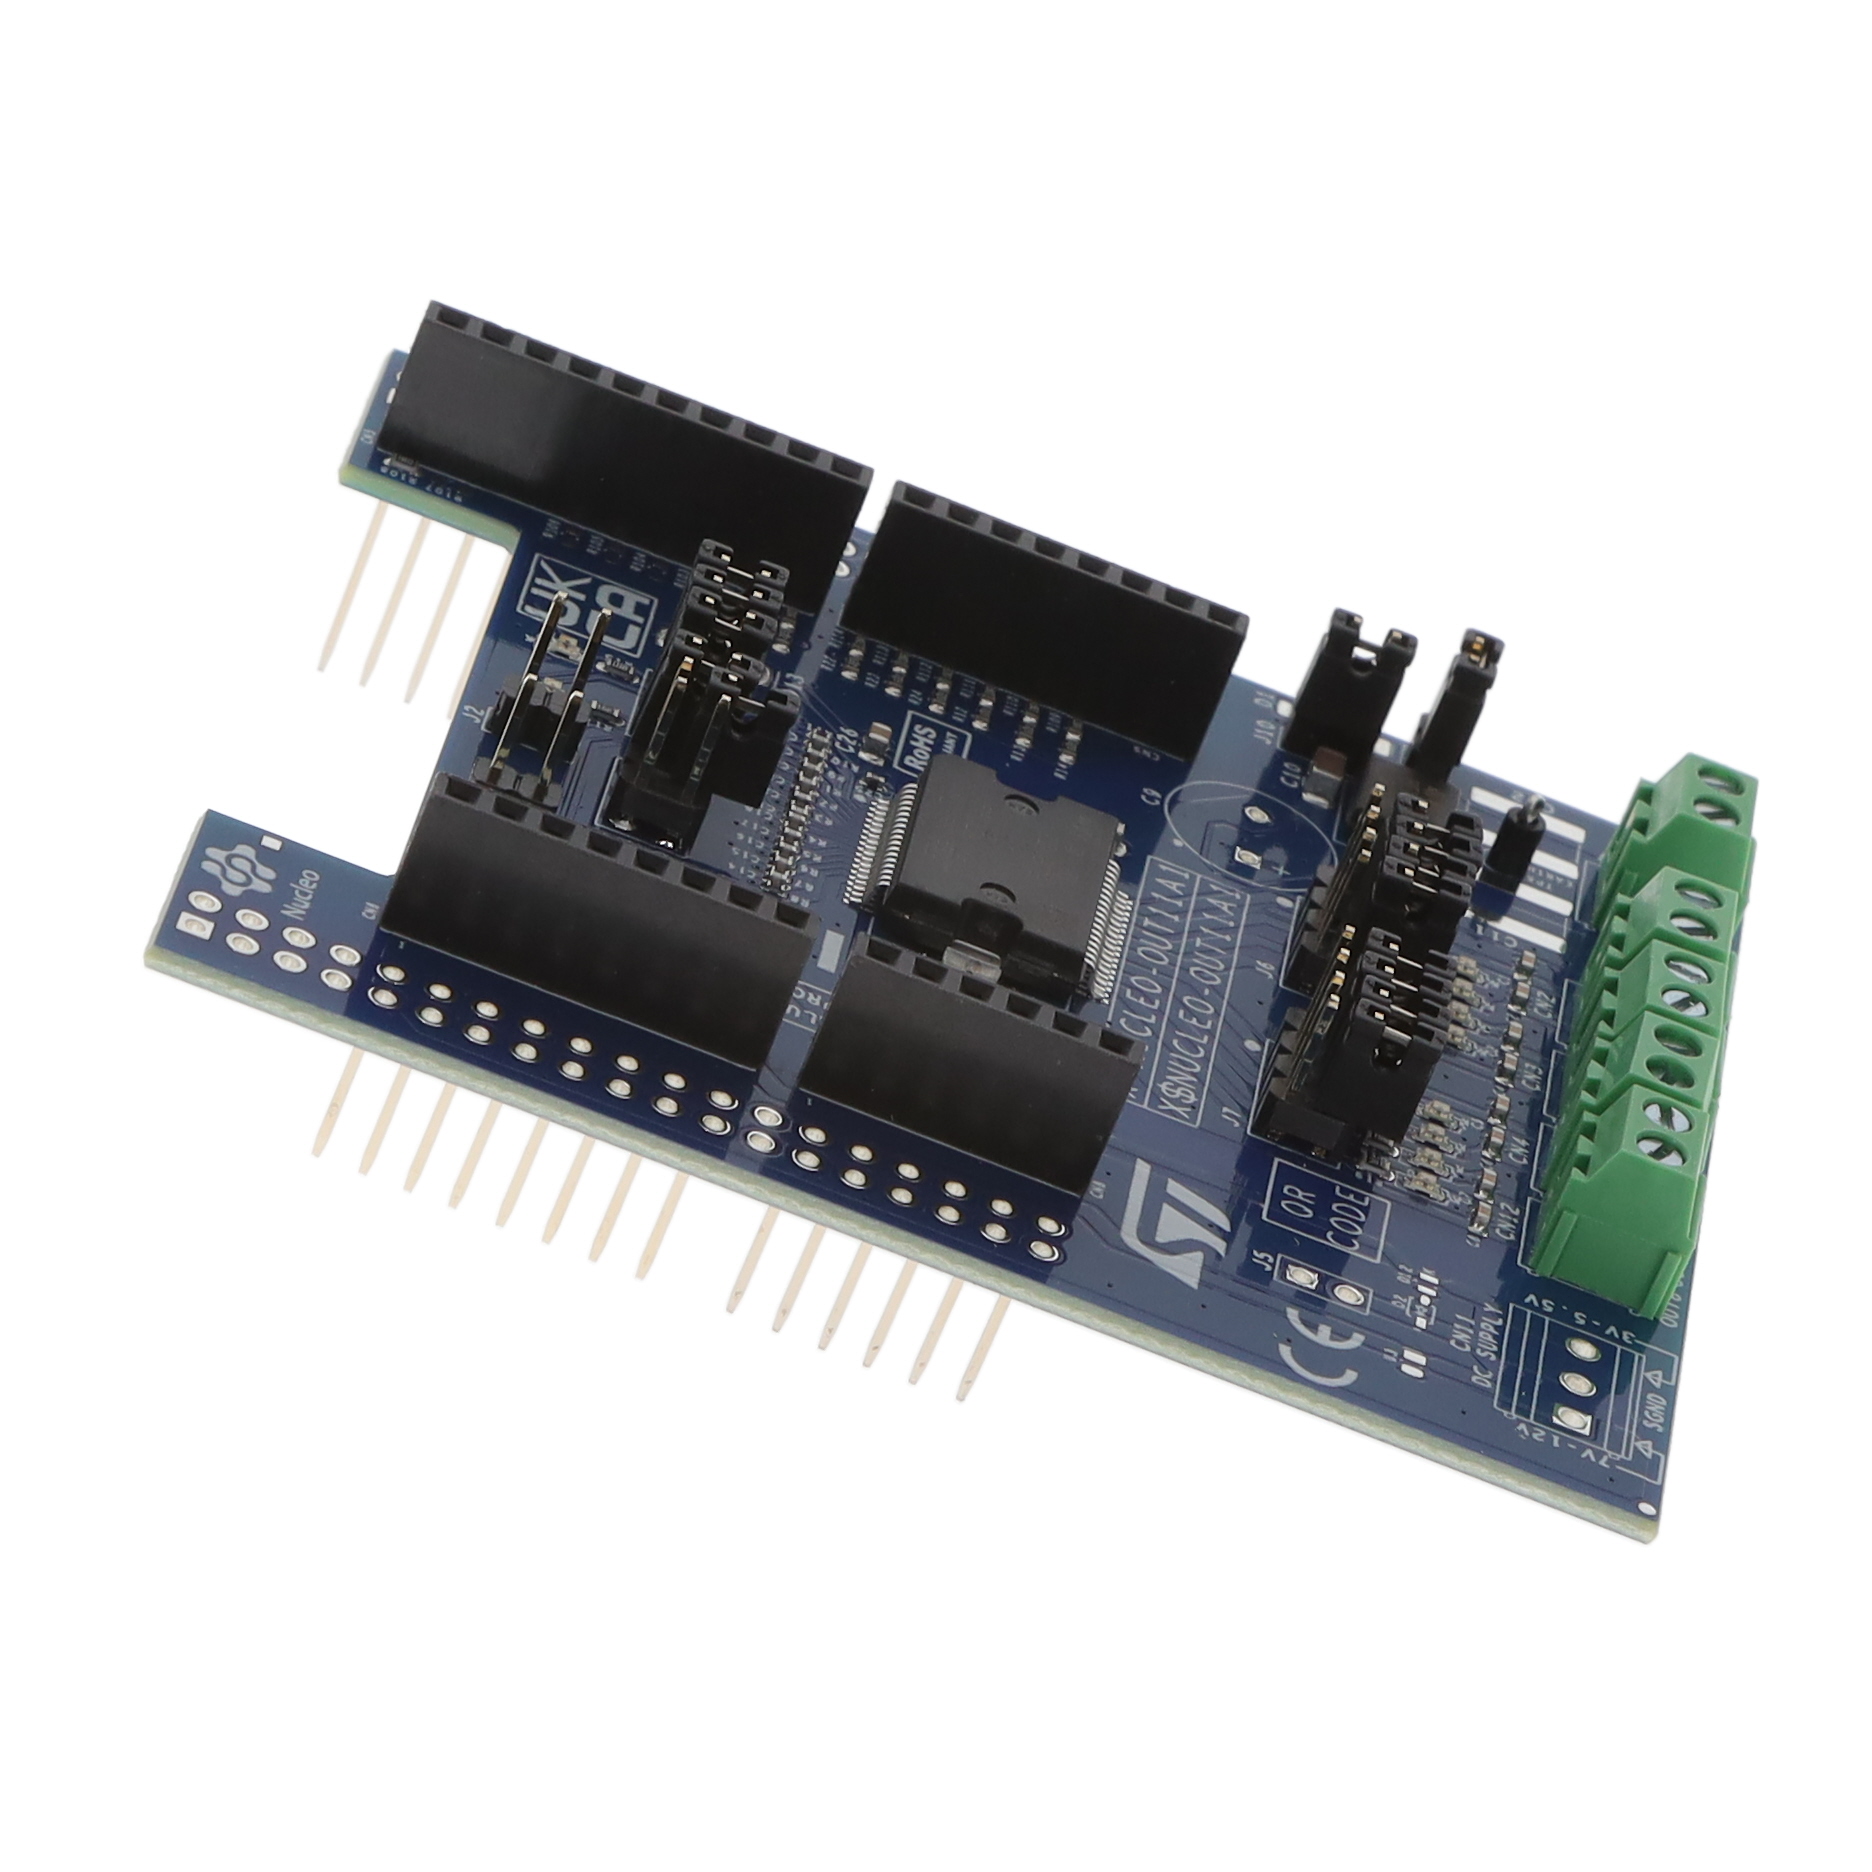 【X-NUCLEO-OUT11A1】NUCLEO BOARD ISO808